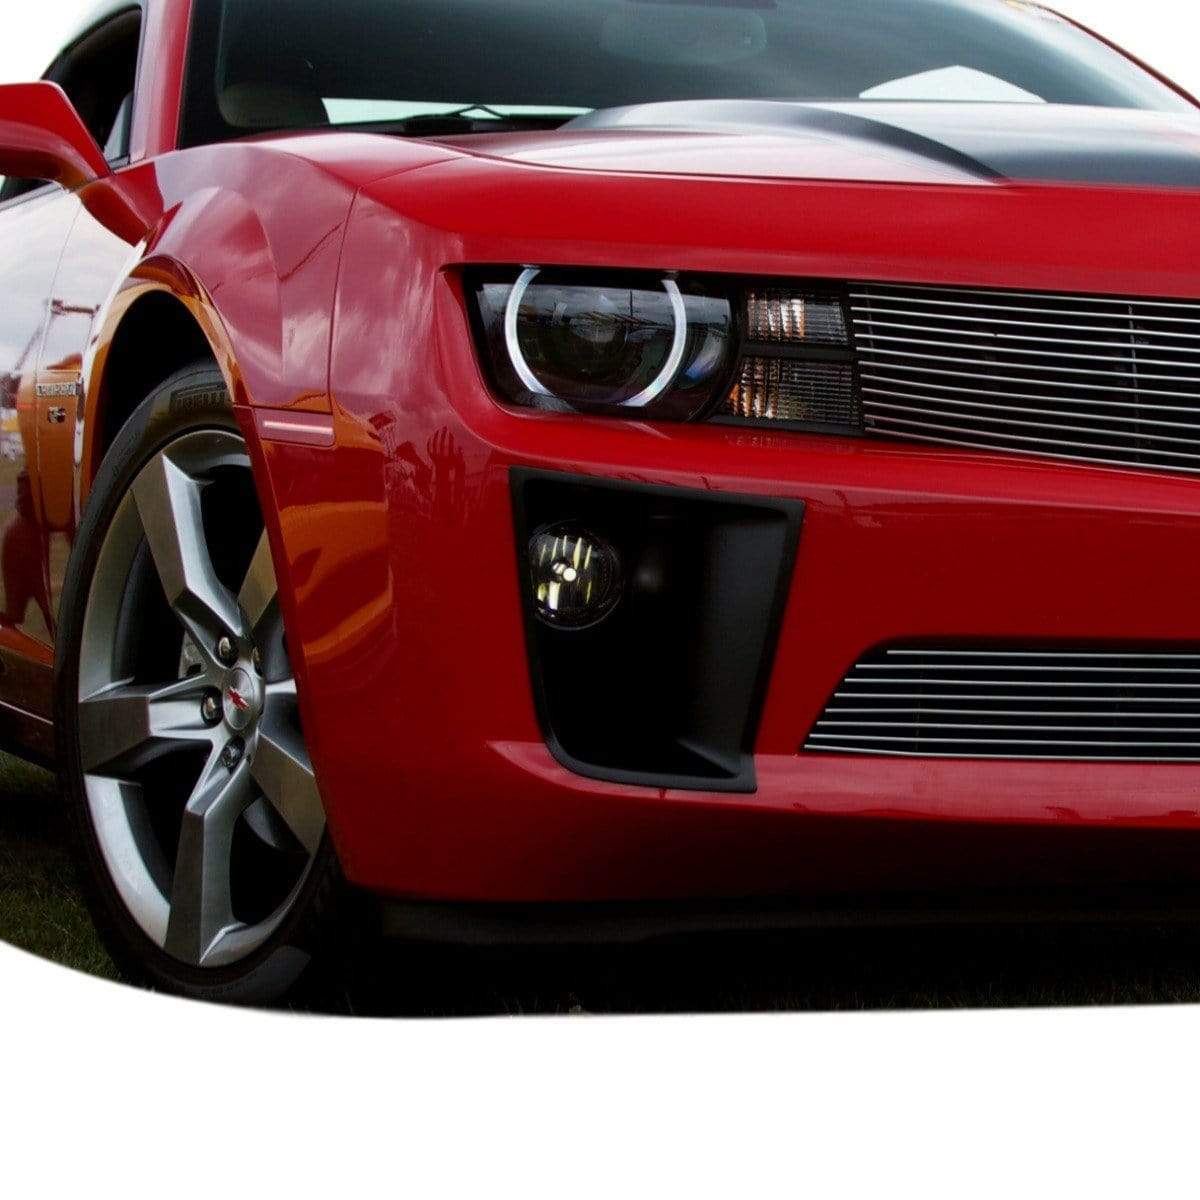 ACS-T3 DRL Light Installation Kit for Camaro 2010-2013 SS V8, SKU 33-4-041, bumper with sleek, aggressive styling